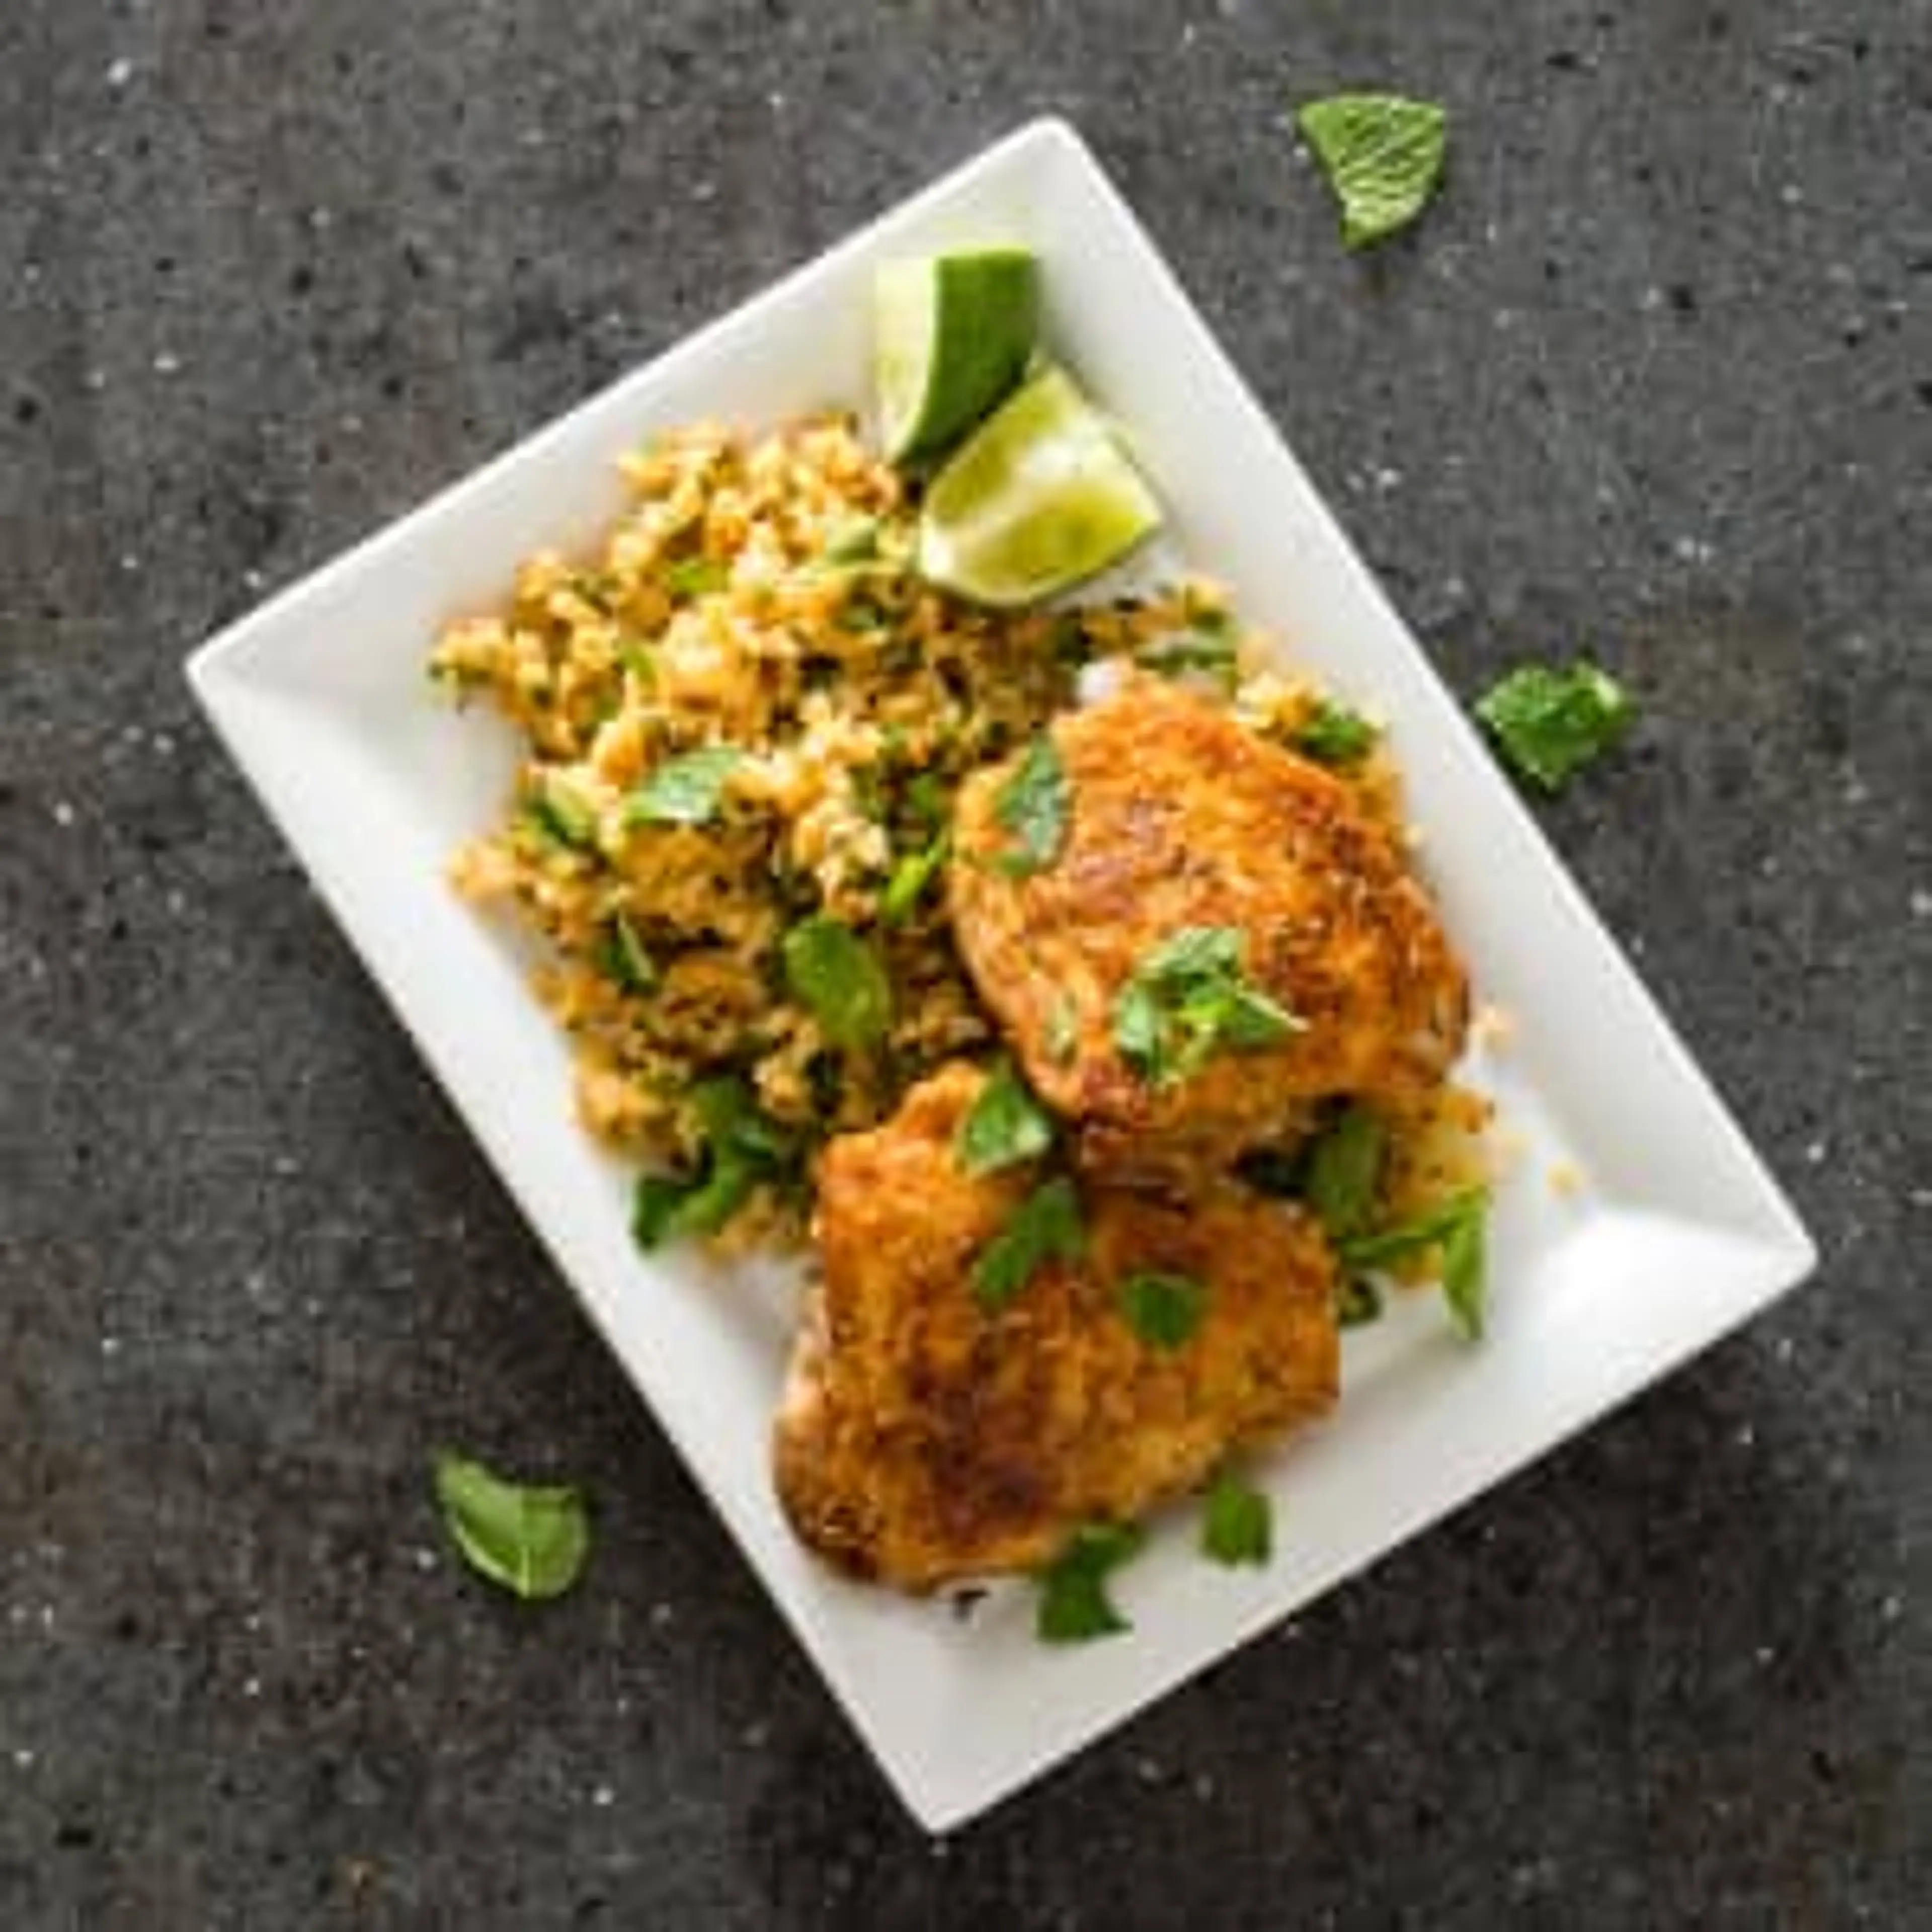 Cumin-Crusted Chicken Thighs with Cauliflower “Couscous”